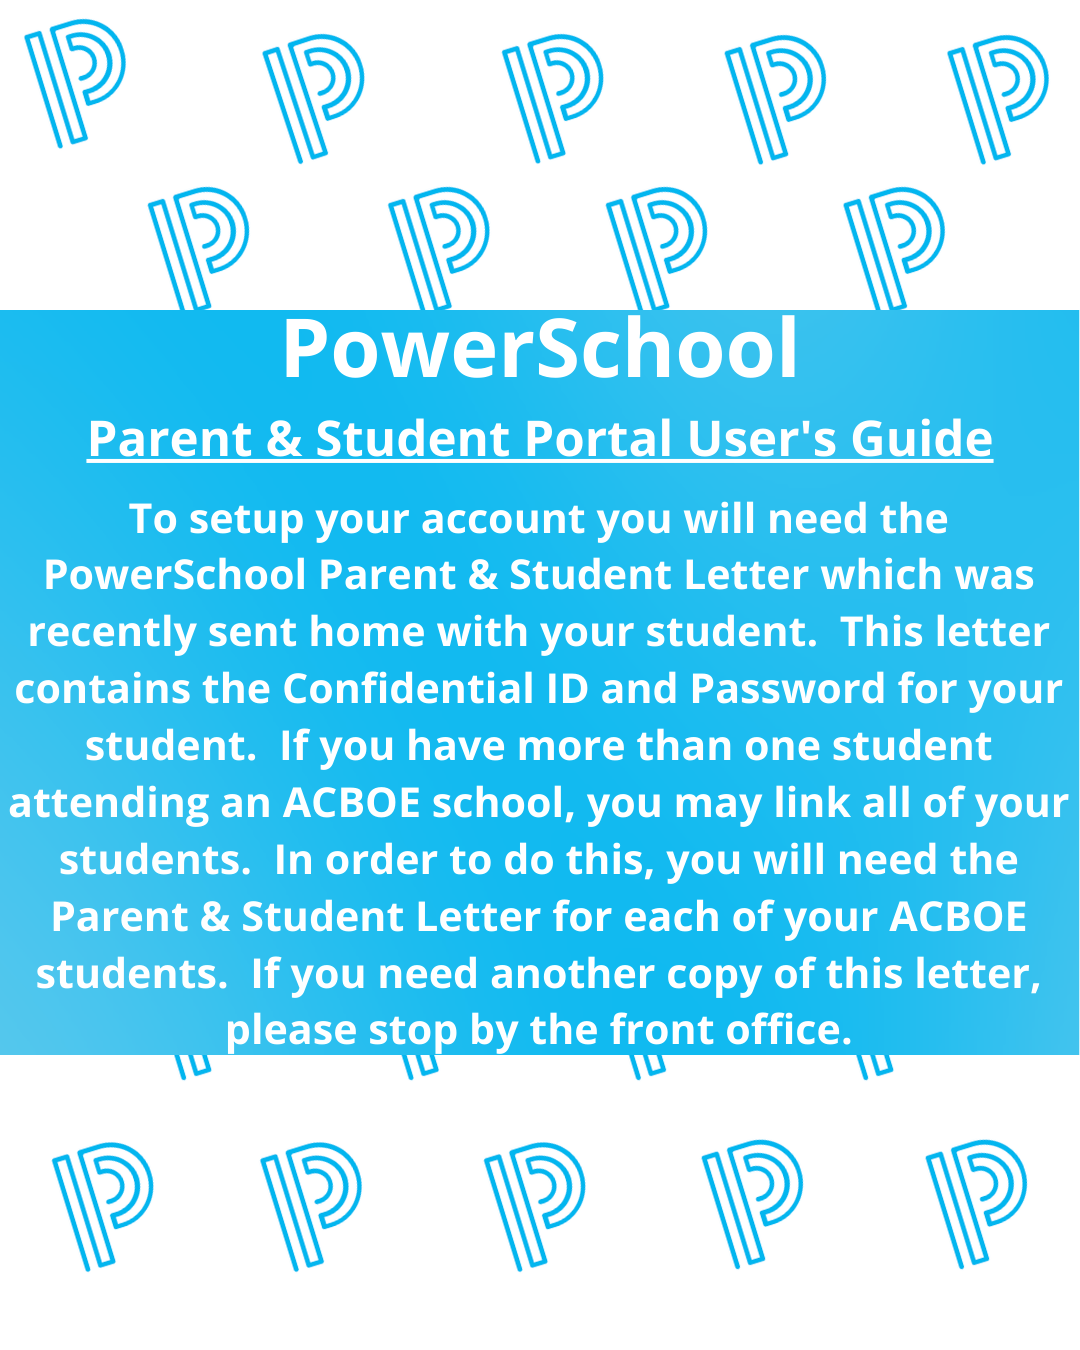 To setup your account you will need the PowerSchool Parent & Student Letter which was recently sent home with your student.  This letter contains the Confidential ID and Password for your student.  If you have more than one student attending an ACBOE school, you may link all of your students.  In order to do this, you will need the Parent & Student Letter for each of your ACBOE students.  If you need another copy of this letter, please stop by the front office. 